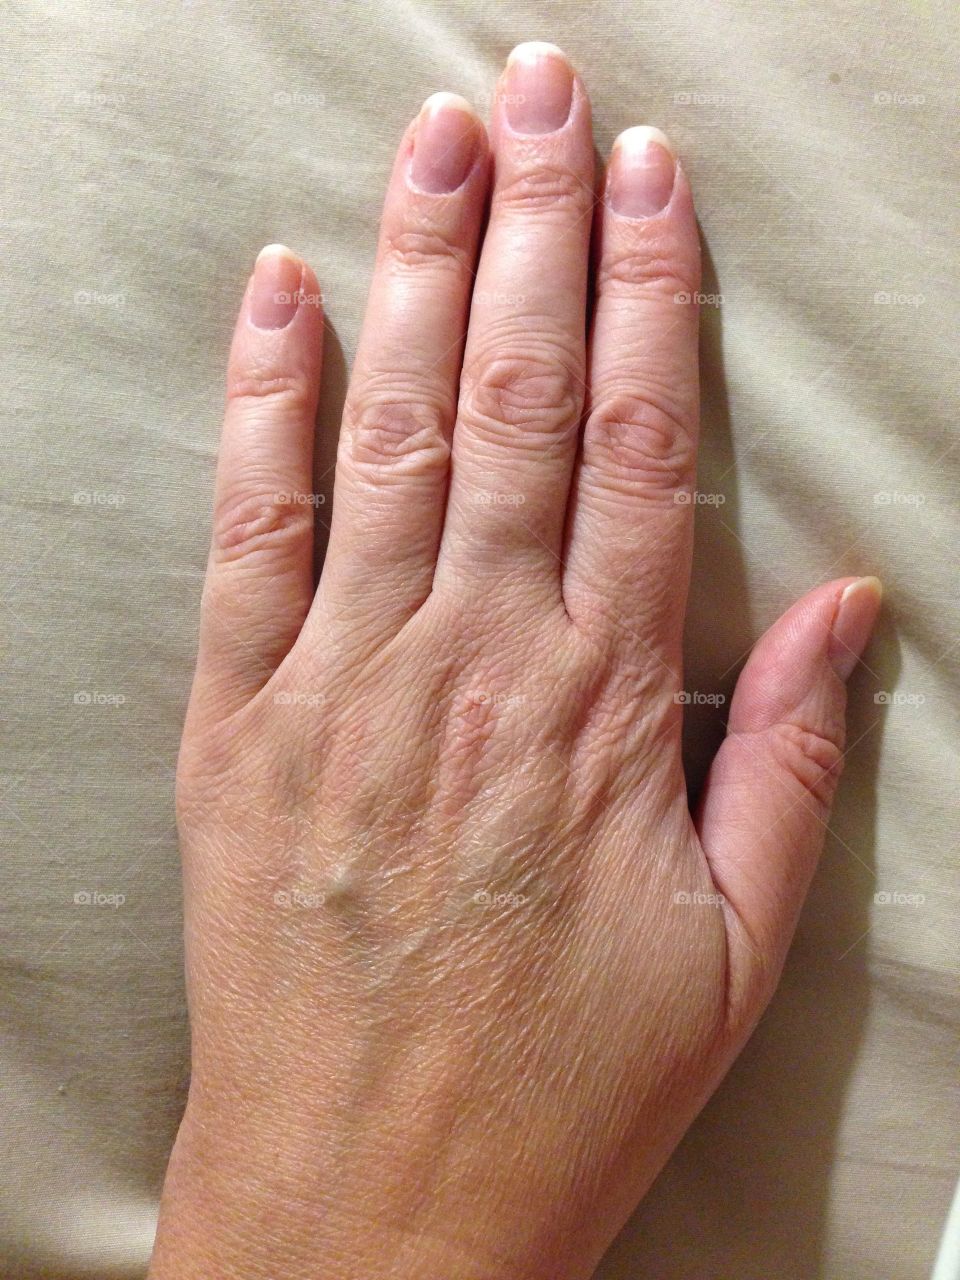 The is a female Caucasian age 44 hand.